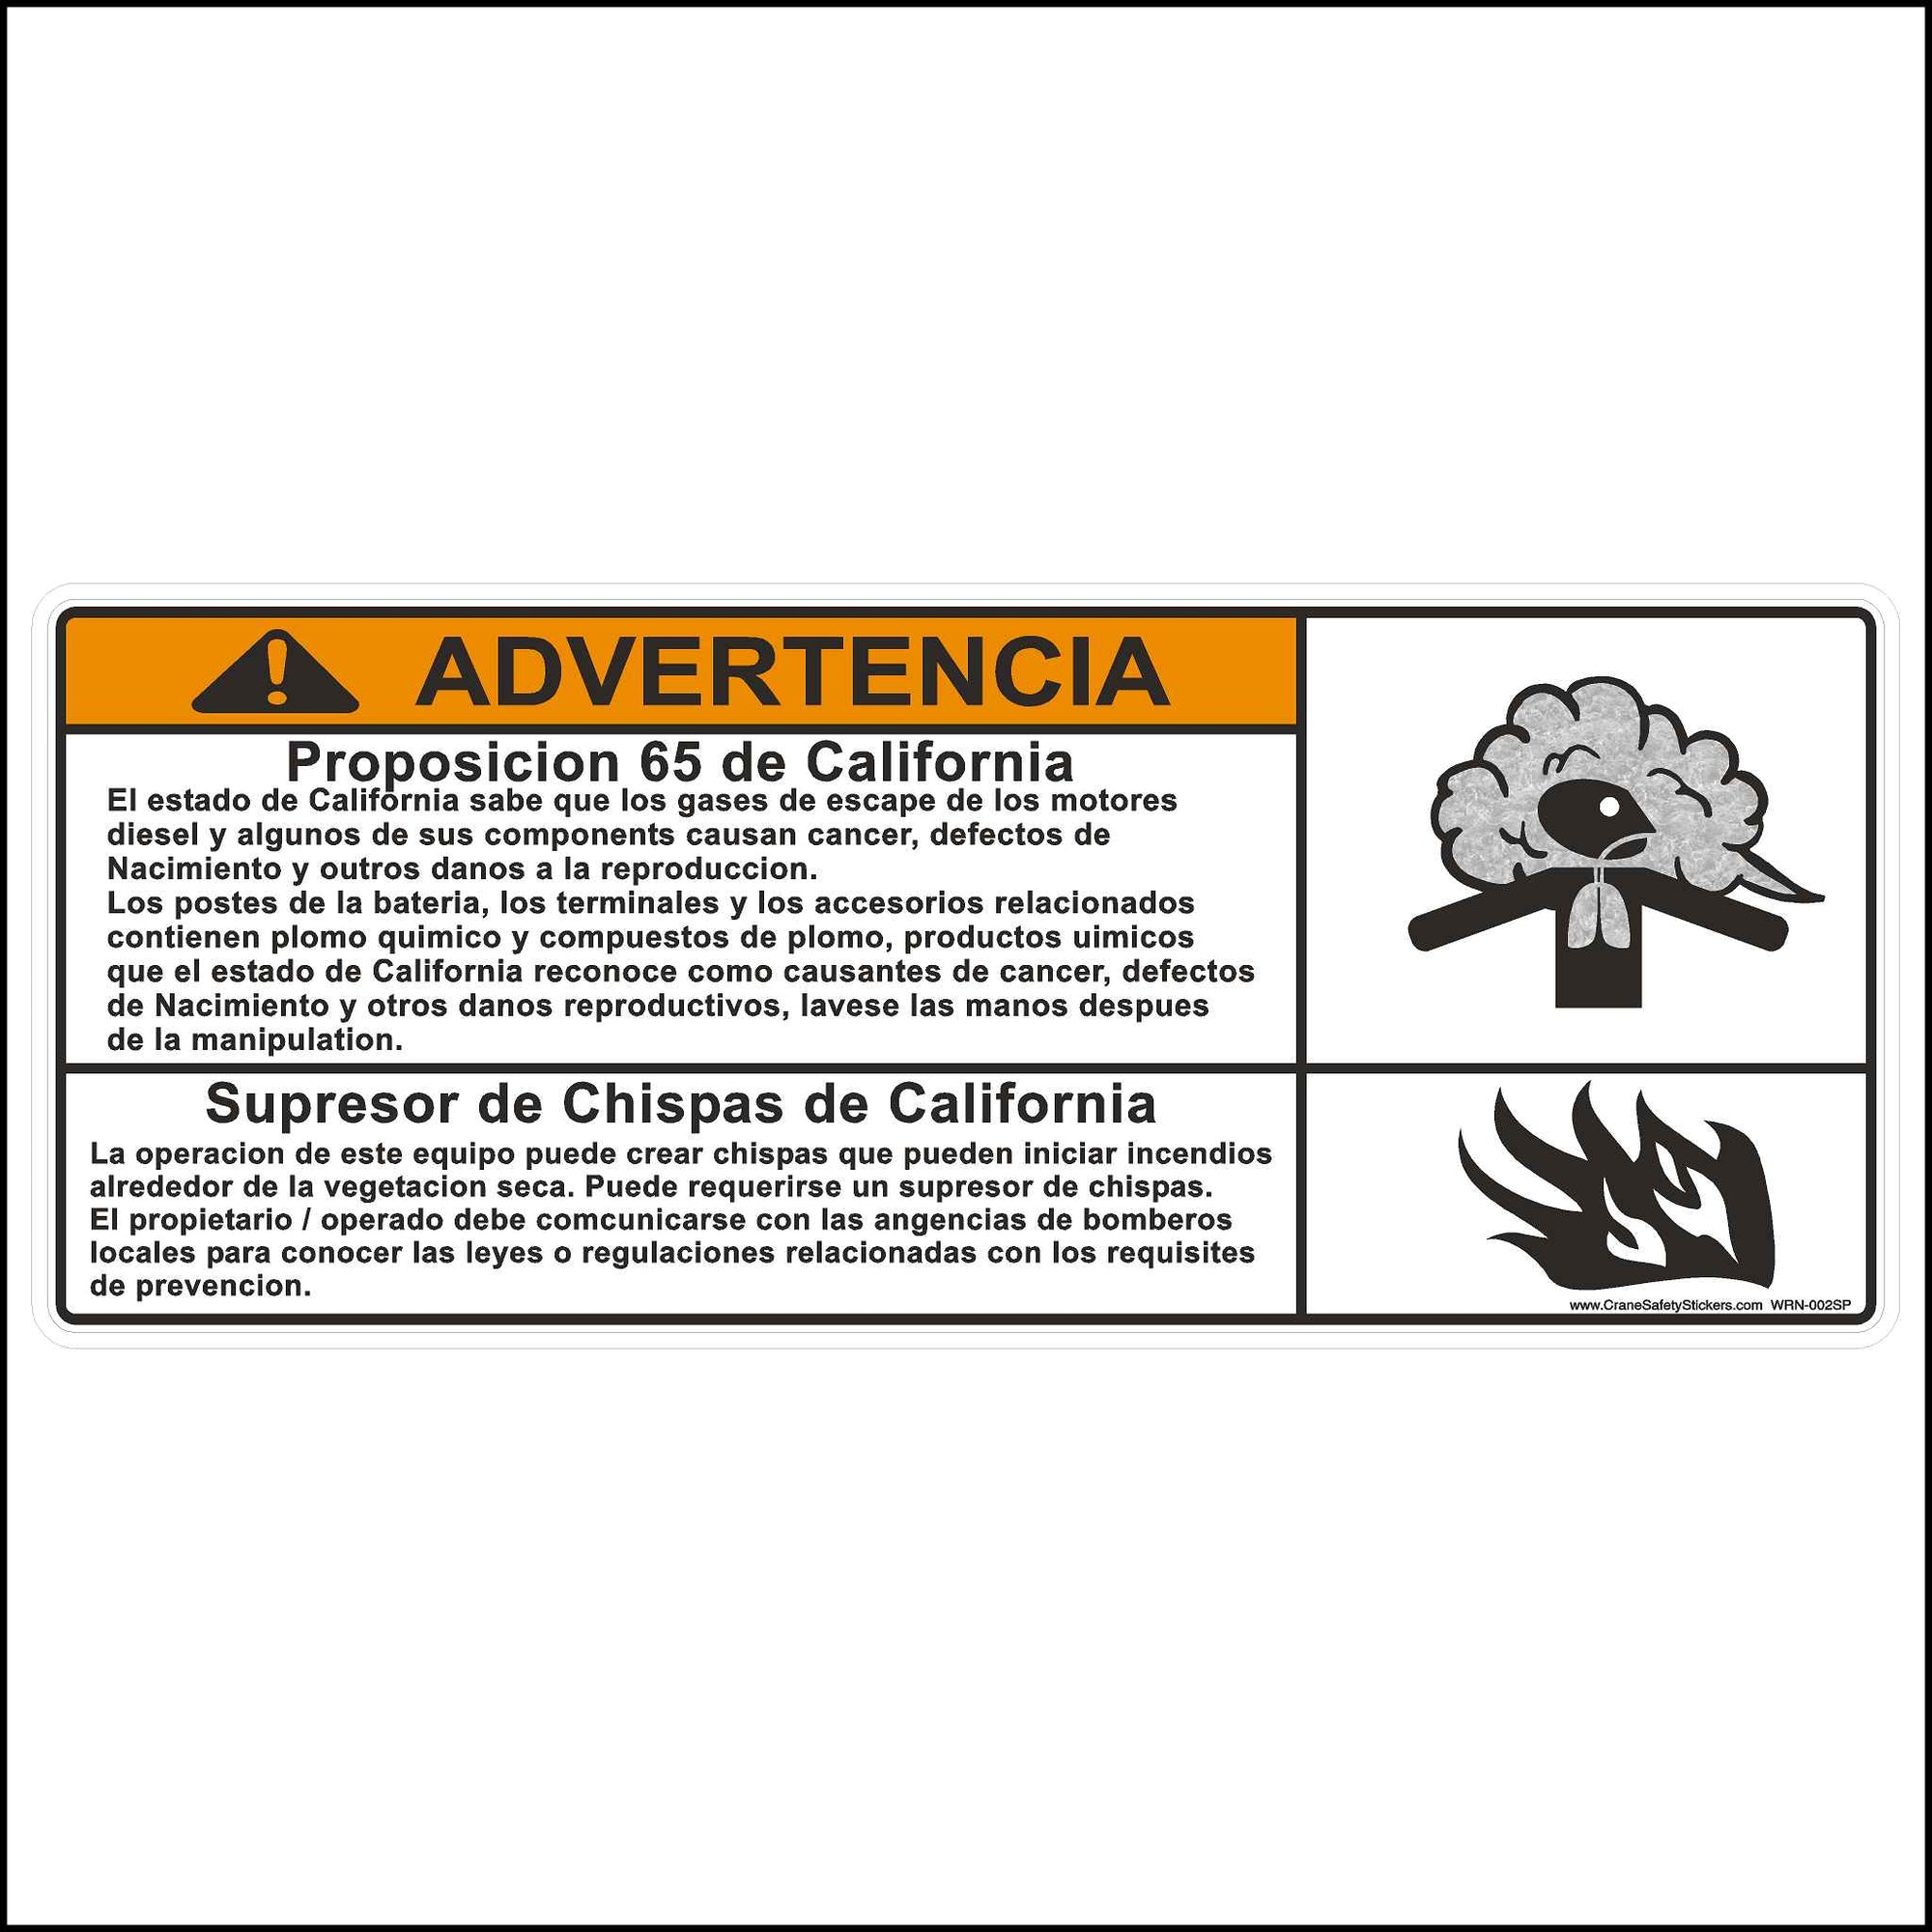 This Spanish California Proposition 65 Spark Arrestor Sticker is Printed in Spanish With. WARNING California Proposition 65 Diesel engine exhaust and some of its constituents are known to the state of California to cause cancer, birth defects, and other reproductive harm. The battery posts, terminals, and related accessories contain chemical lead and lead compounds, chemicals known to the state of California to cause cancer, birth defects, and other reproductive harm. Wash hands after handling.